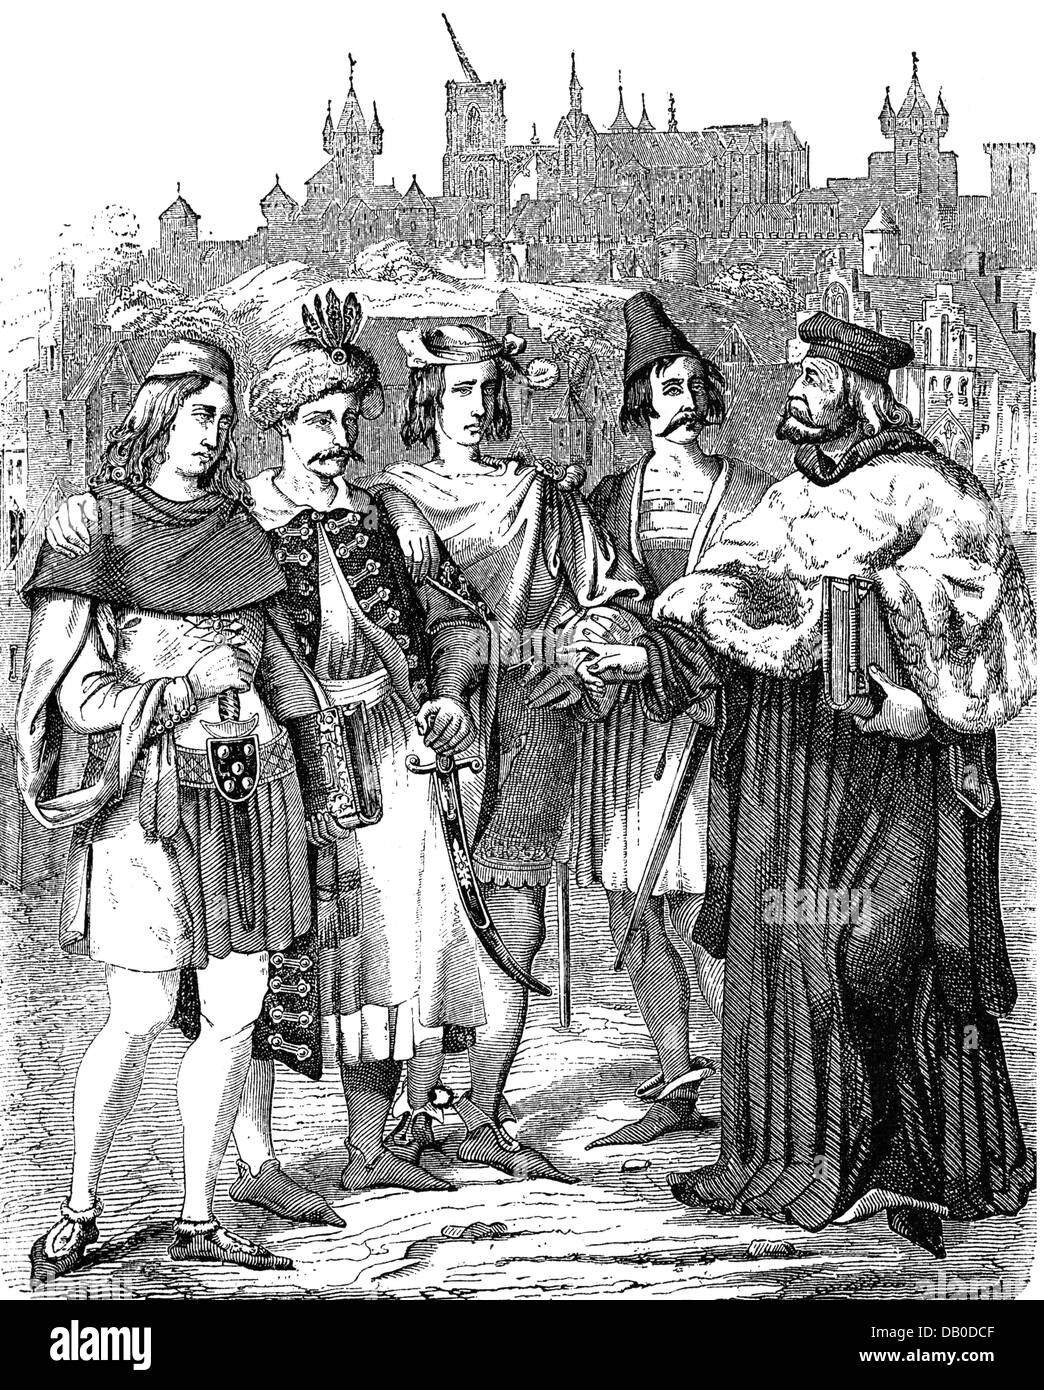 pedagogy, students, principal and students of different nationalities, University of Prague in the 14th century, wood engraving, 19th century, German, Polish, Czech, Hungarian, people, men, man, costume, costumes, traditional costume, national costume, dress, traditional costumes, national costumes, dresses, clothes, Charles university, Kingdom of Bohemia, Holy Roman Empire, HRE, Middle Ages, historic, historical, medieval, Additional-Rights-Clearences-Not Available Stock Photo